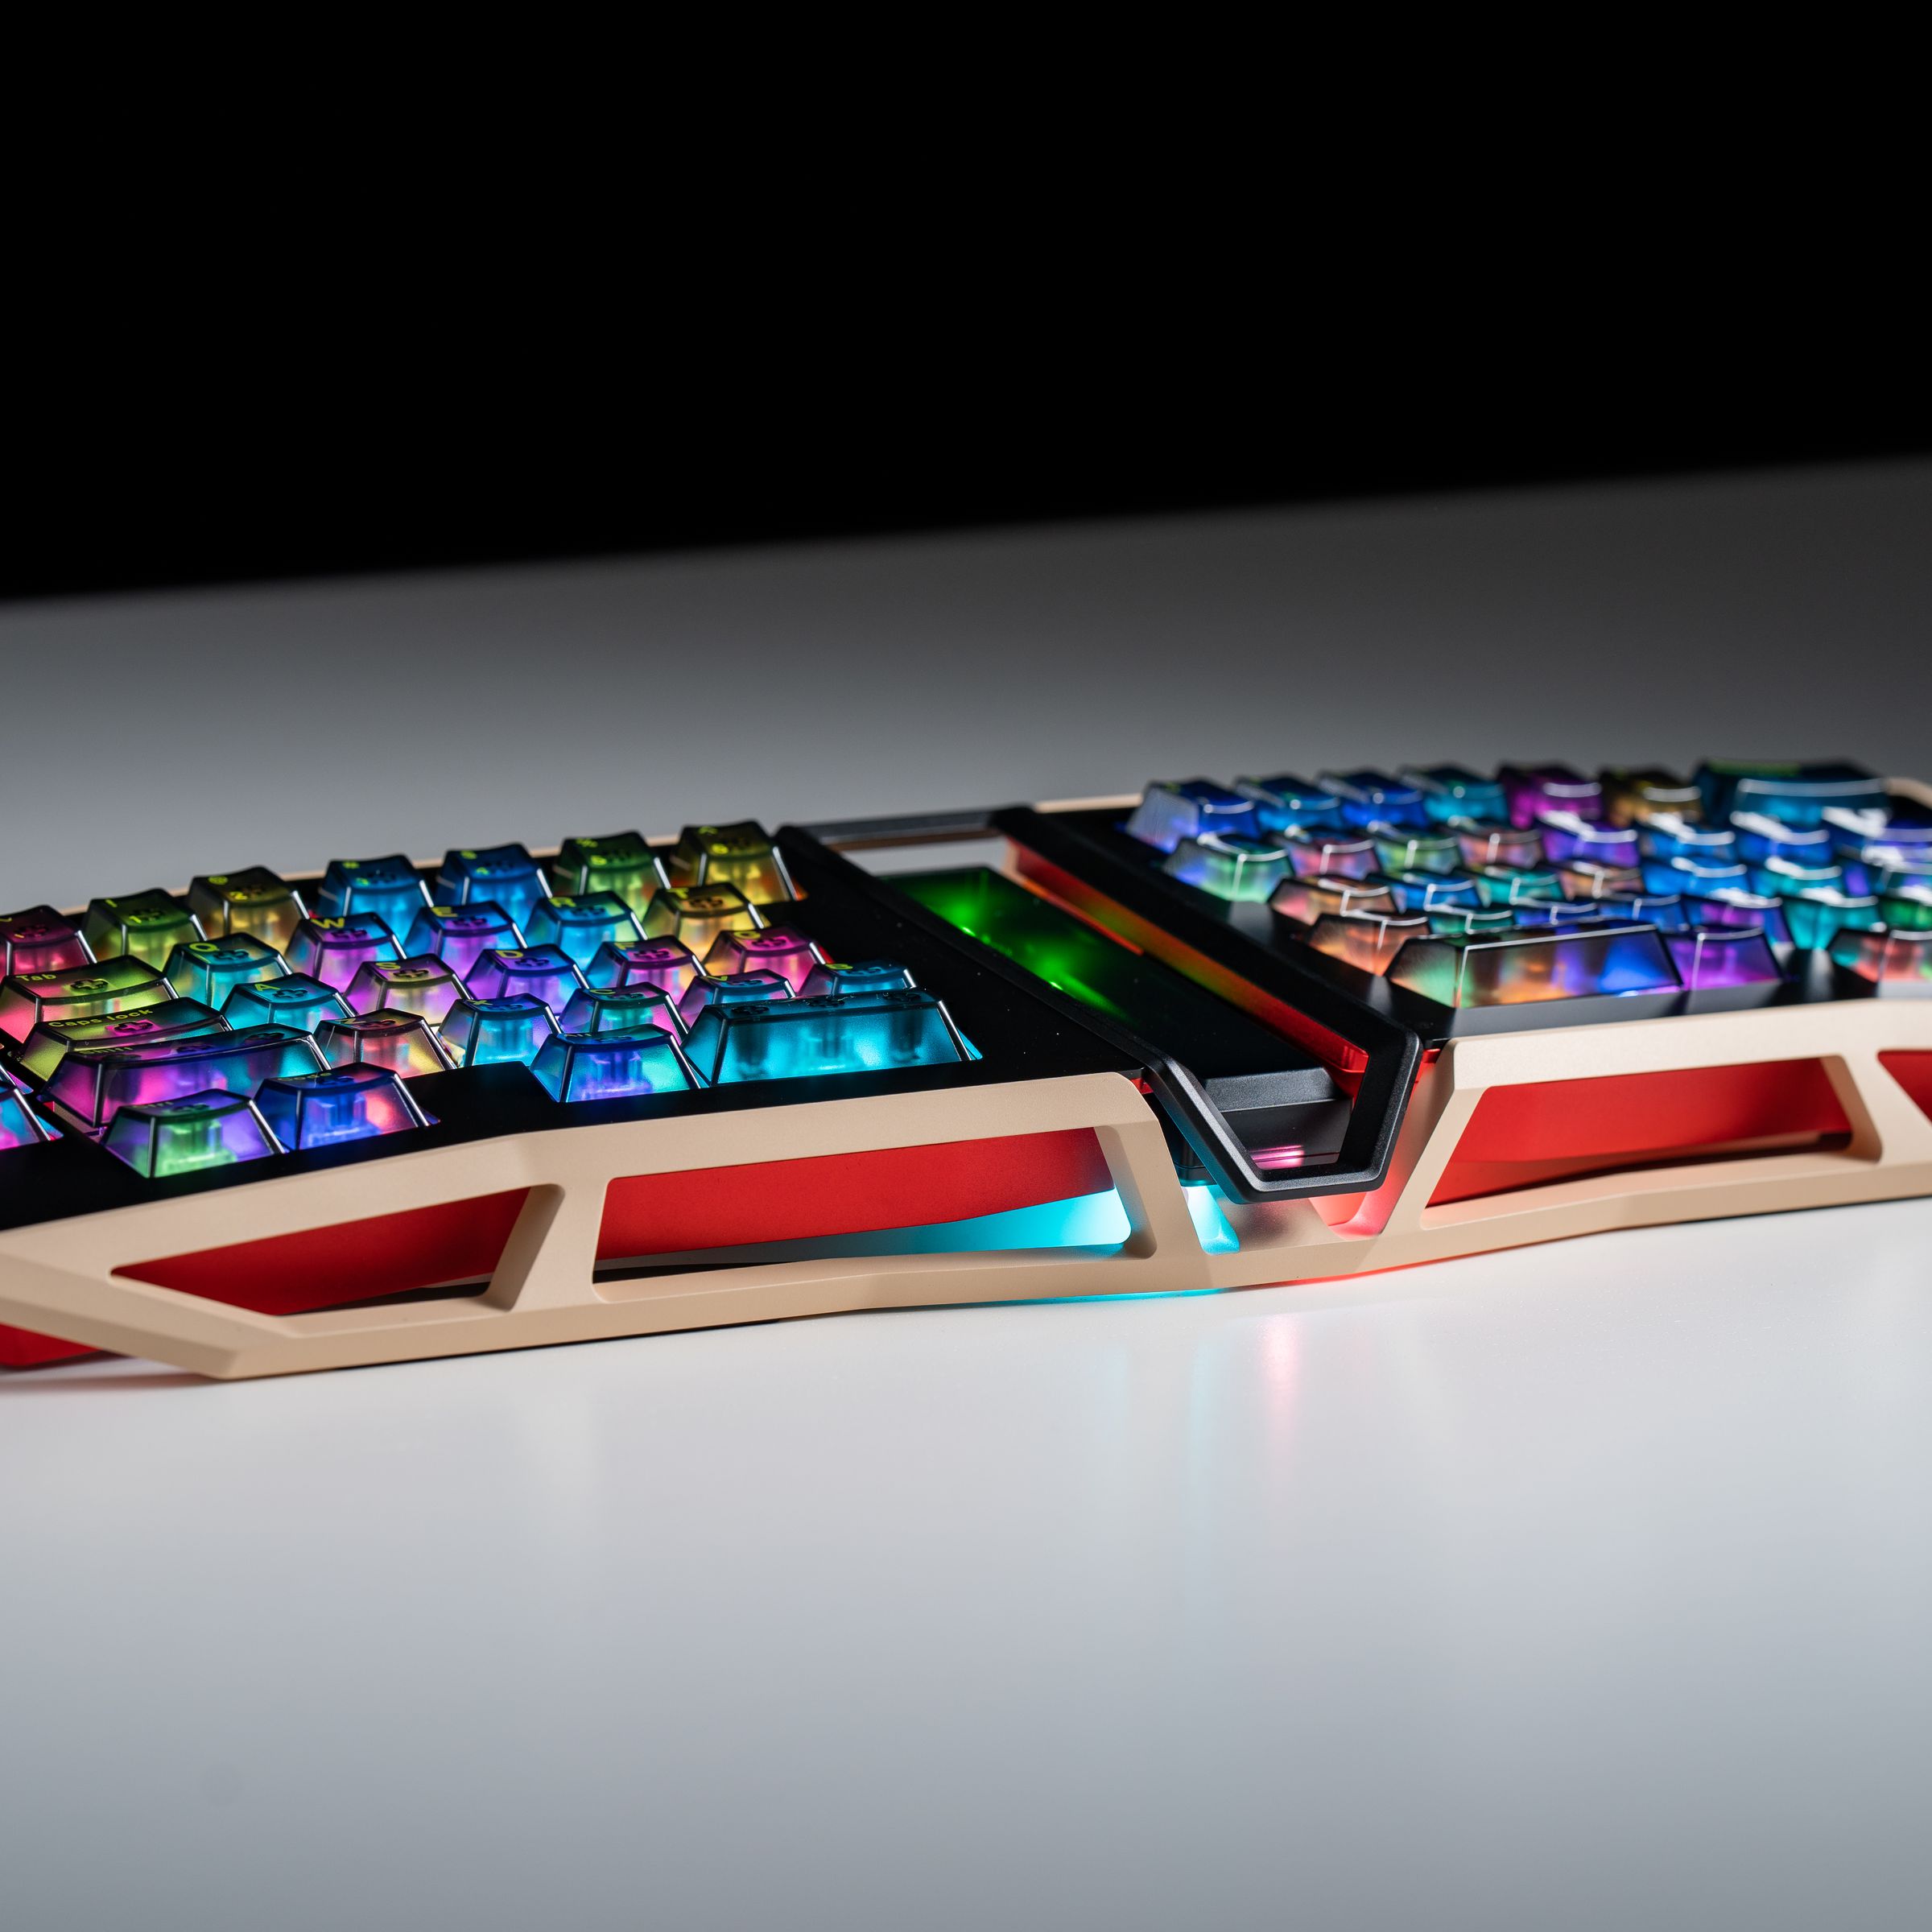 A tan and red ergonomic keyboard with see-through keycaps illuminated by multicolored light, resting on a white table.